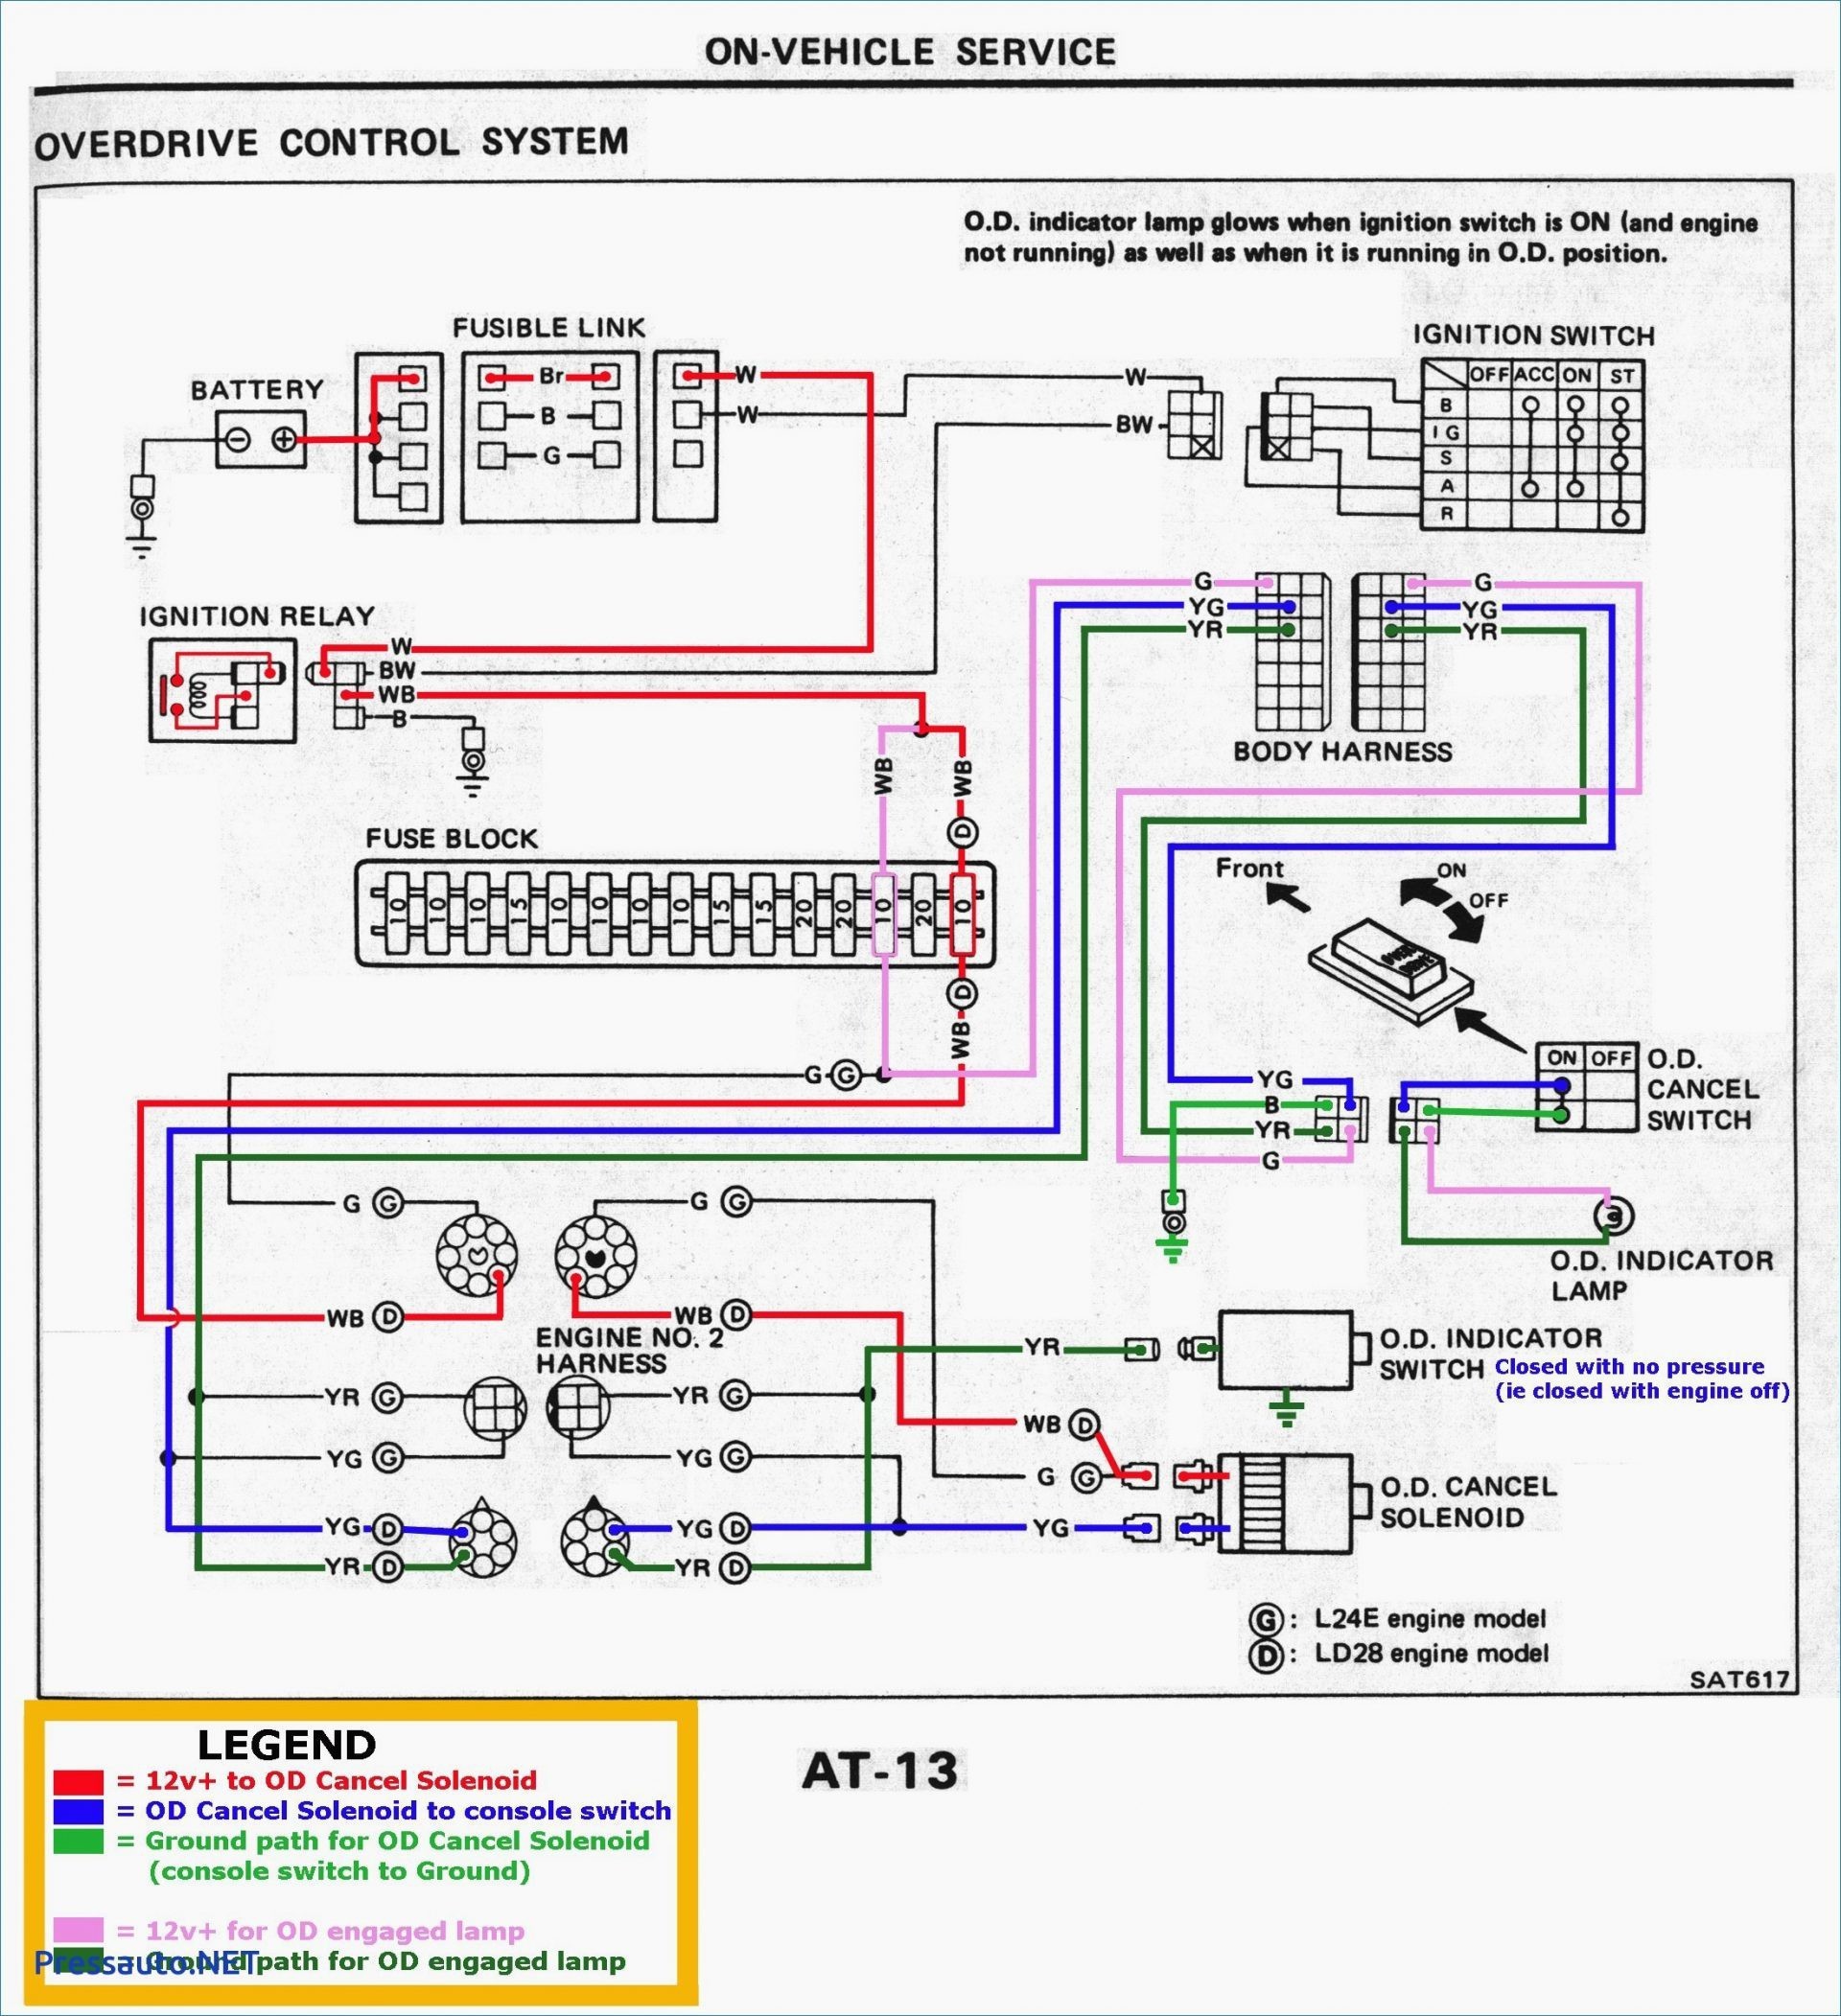 wiring diagram practice top rated chevy ignition coil wiring diagram rh joescablecar MSD Ignition Wiring Diagram MSD Ignition Wiring Diagram